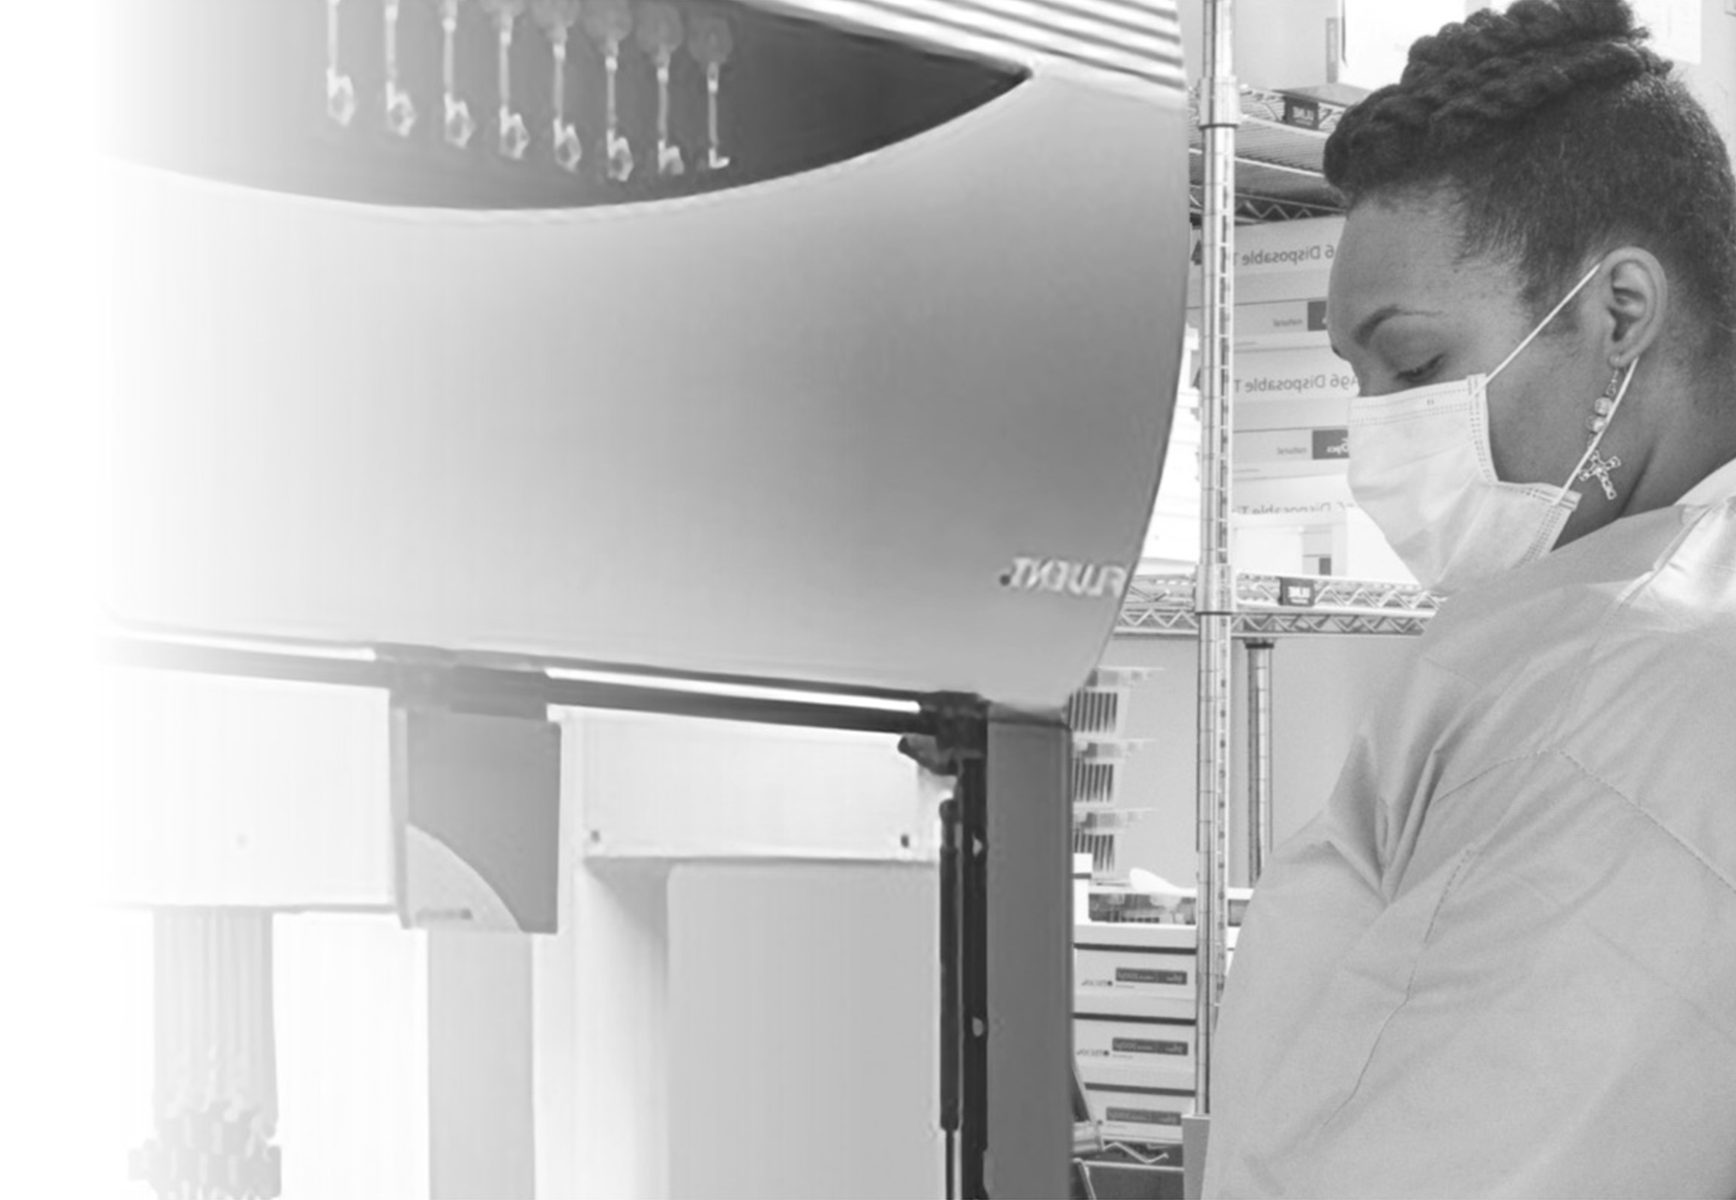 A Black woman wearing a face mask working in a laboratory